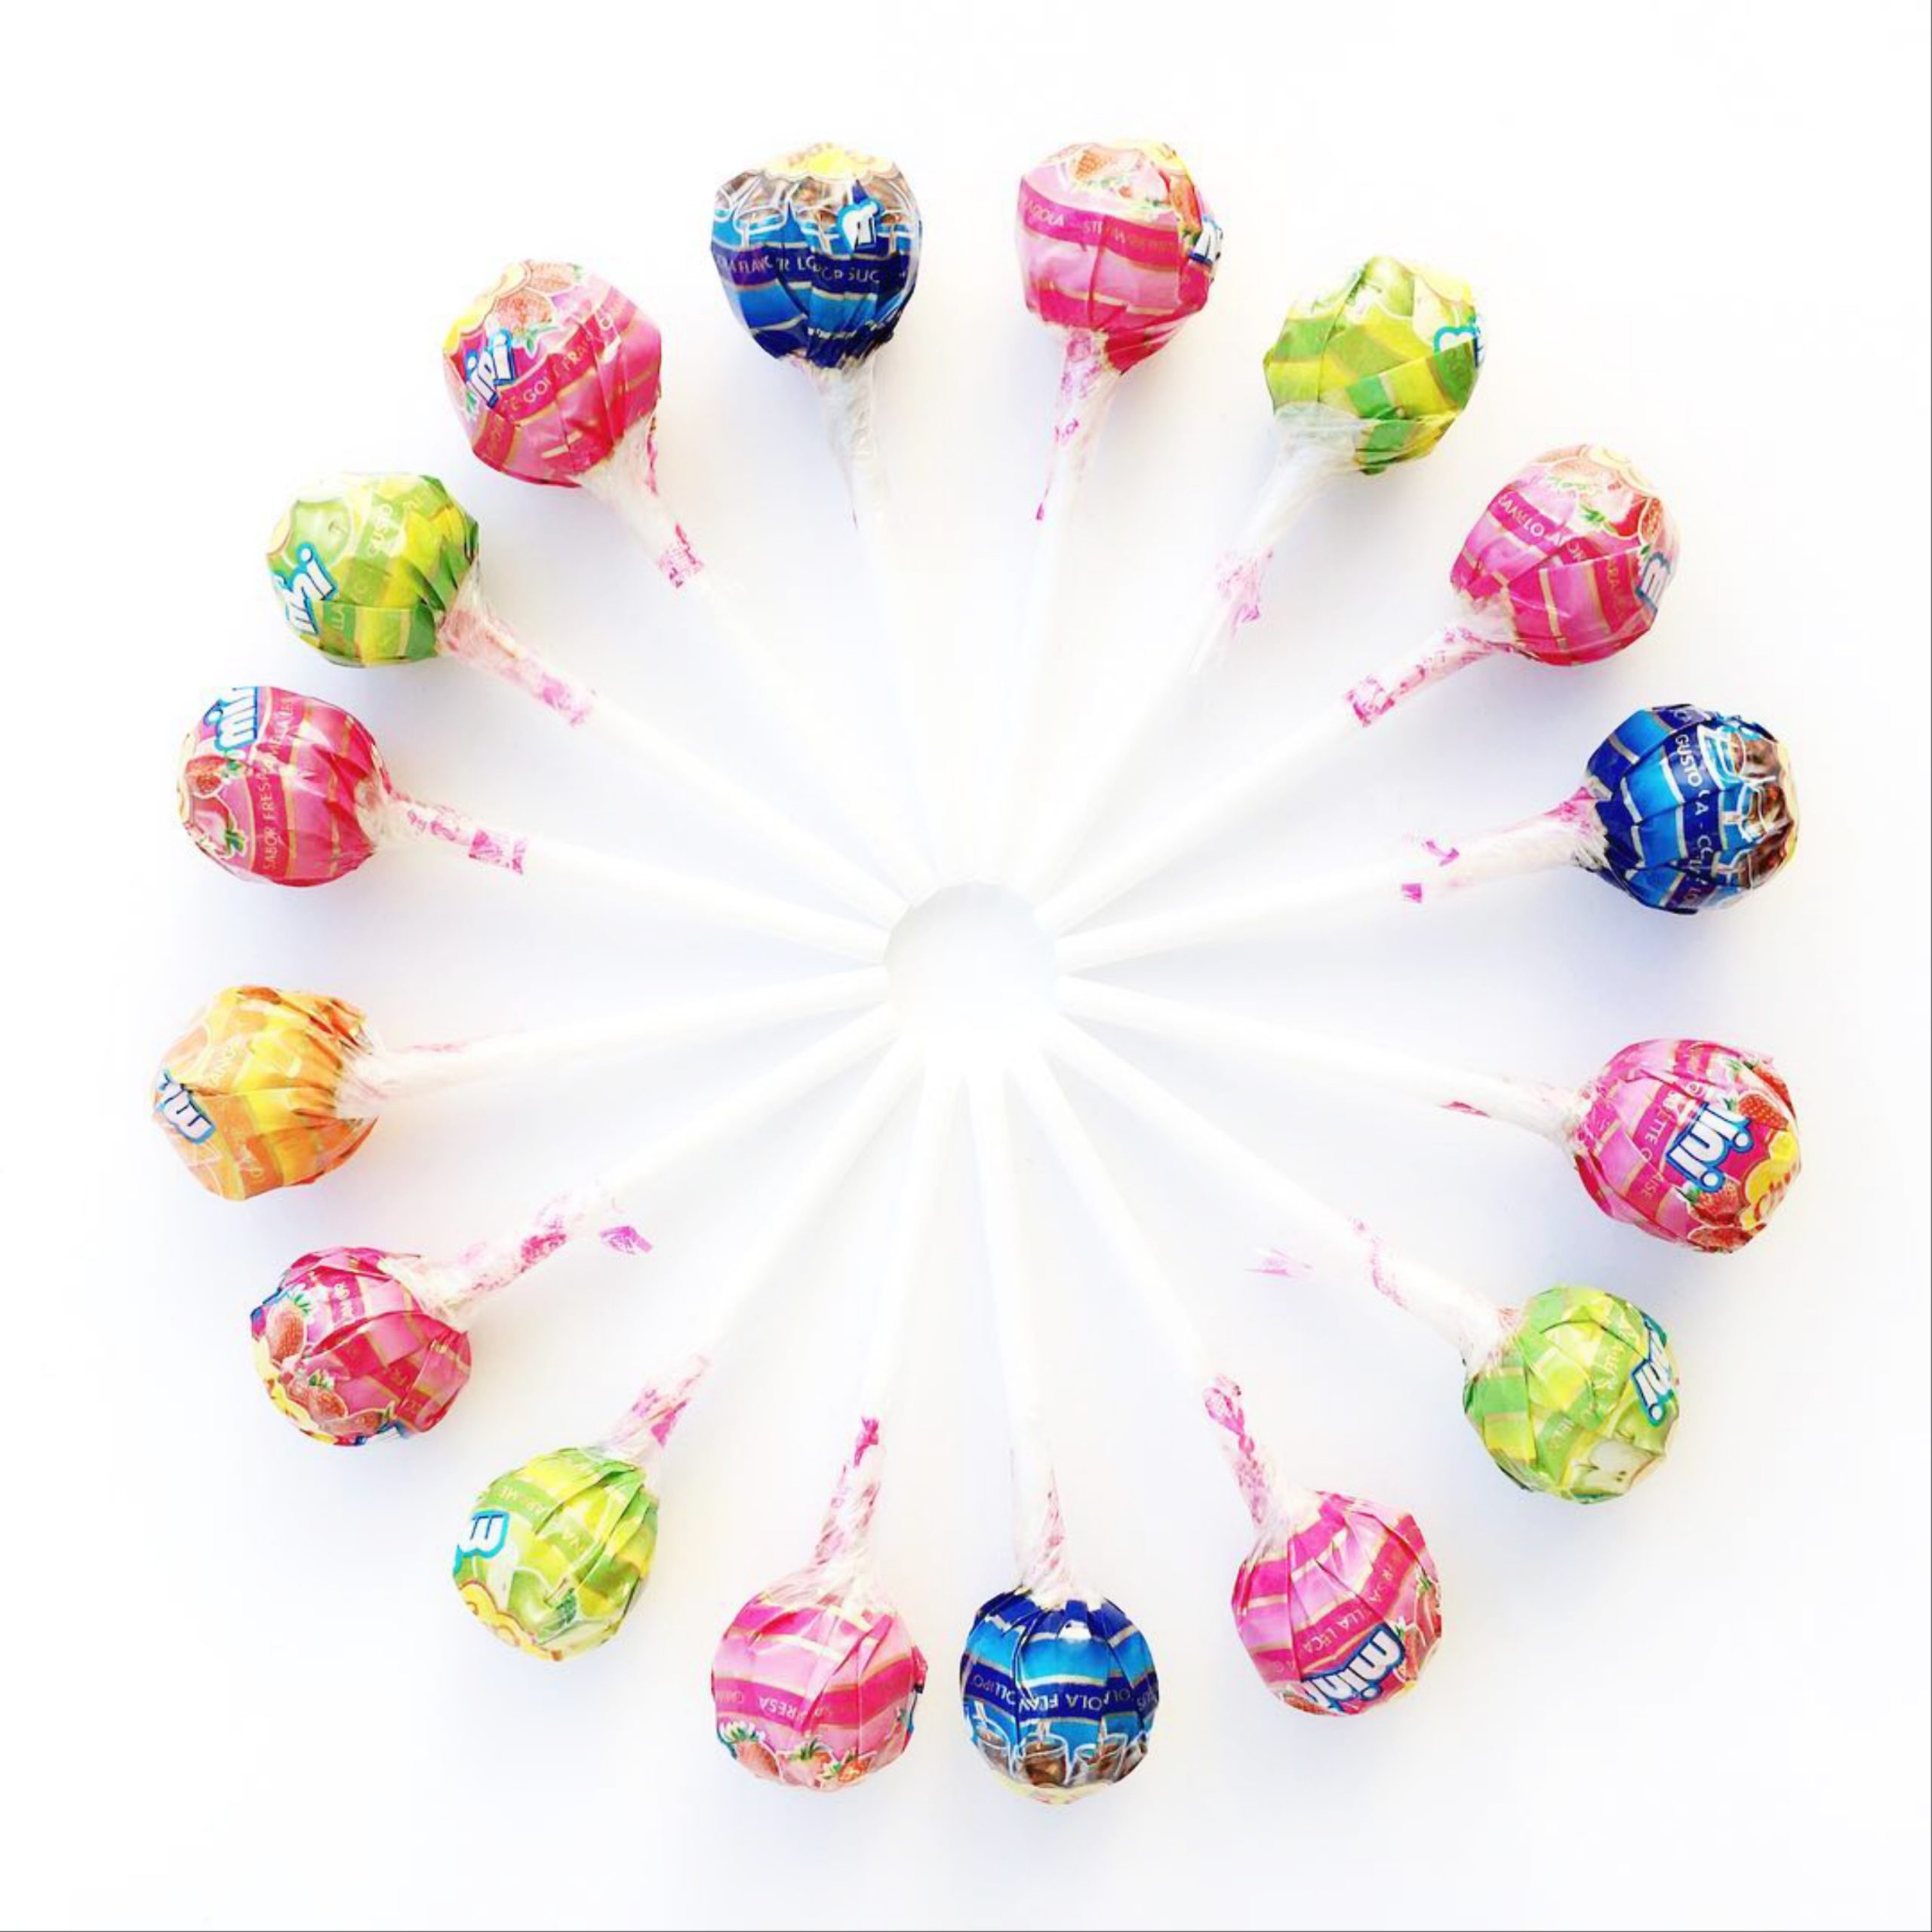 A circle made with lollypops